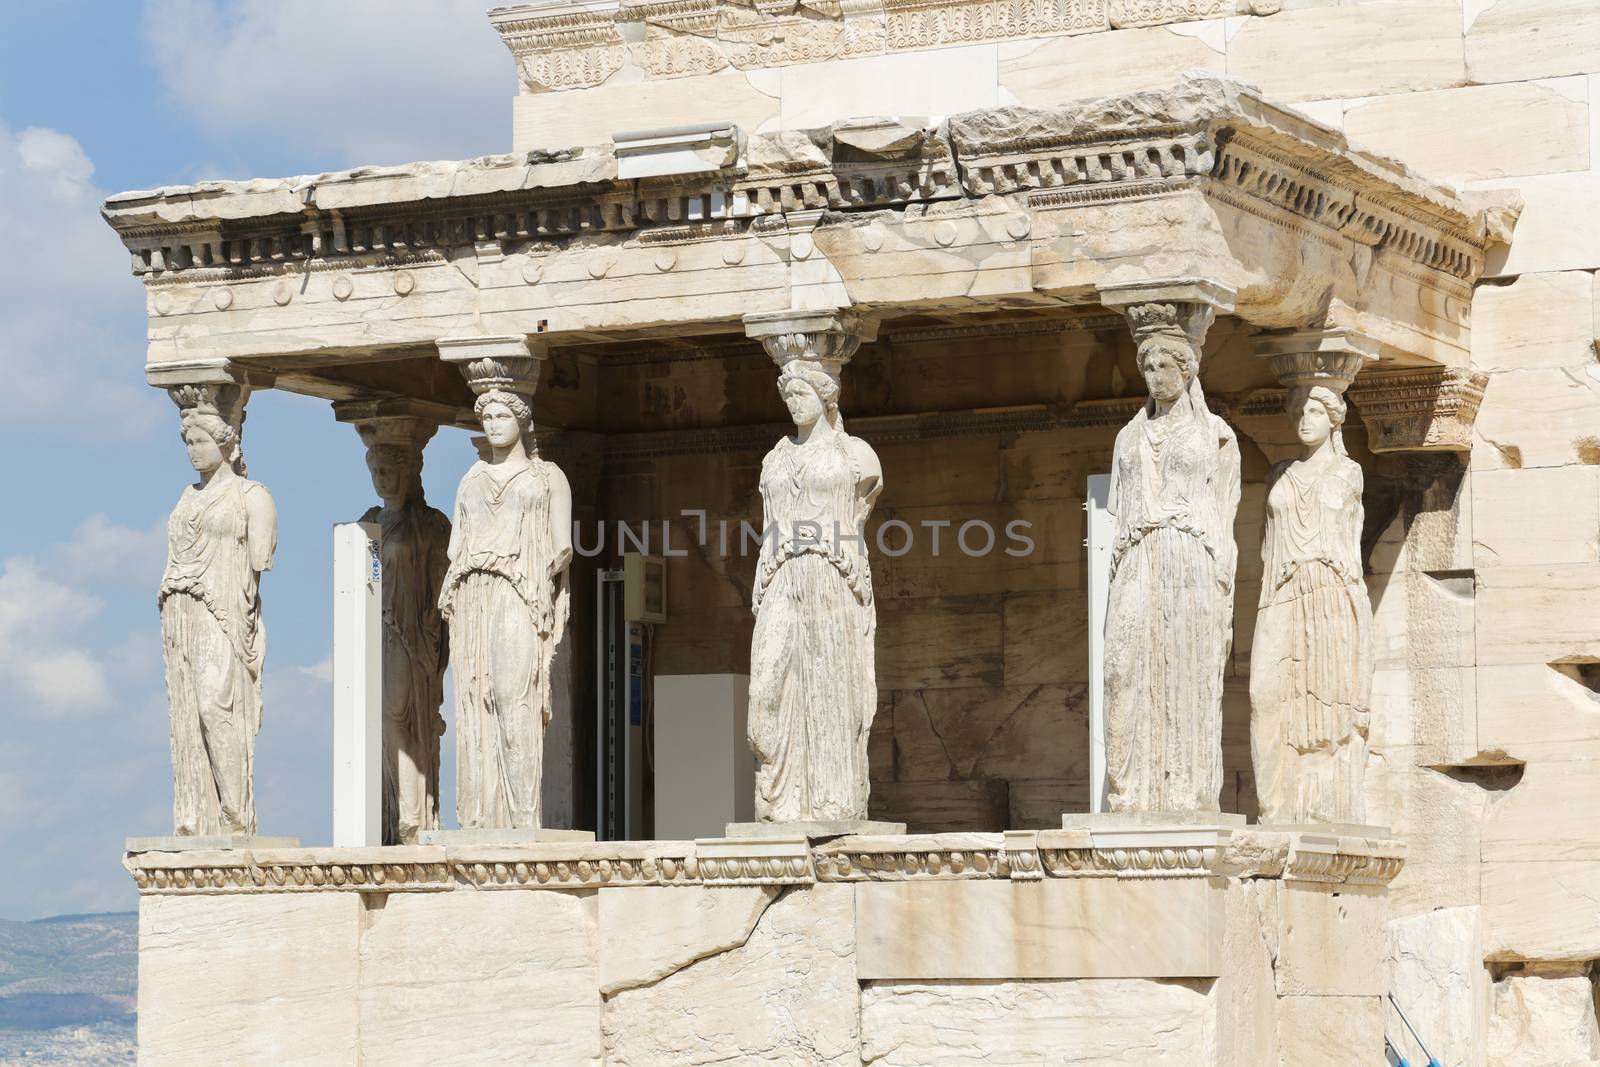 The Porch of the Caryatids at the Acropolis in Athens, Greece